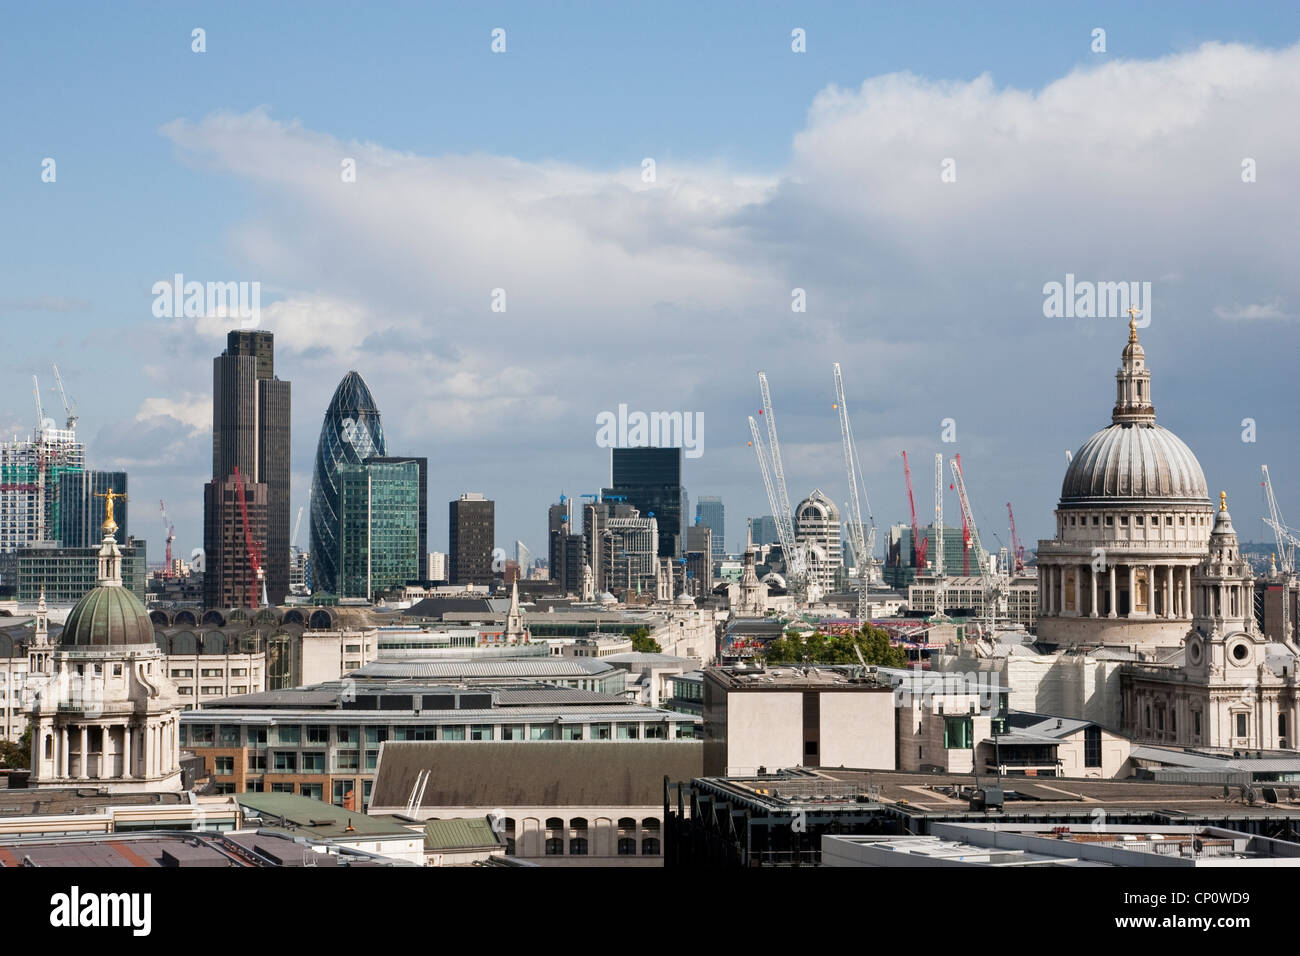 Horizontal Cityscape across the skyline of the City of London, showing the financial district in the distance, England, UK Stock Photo